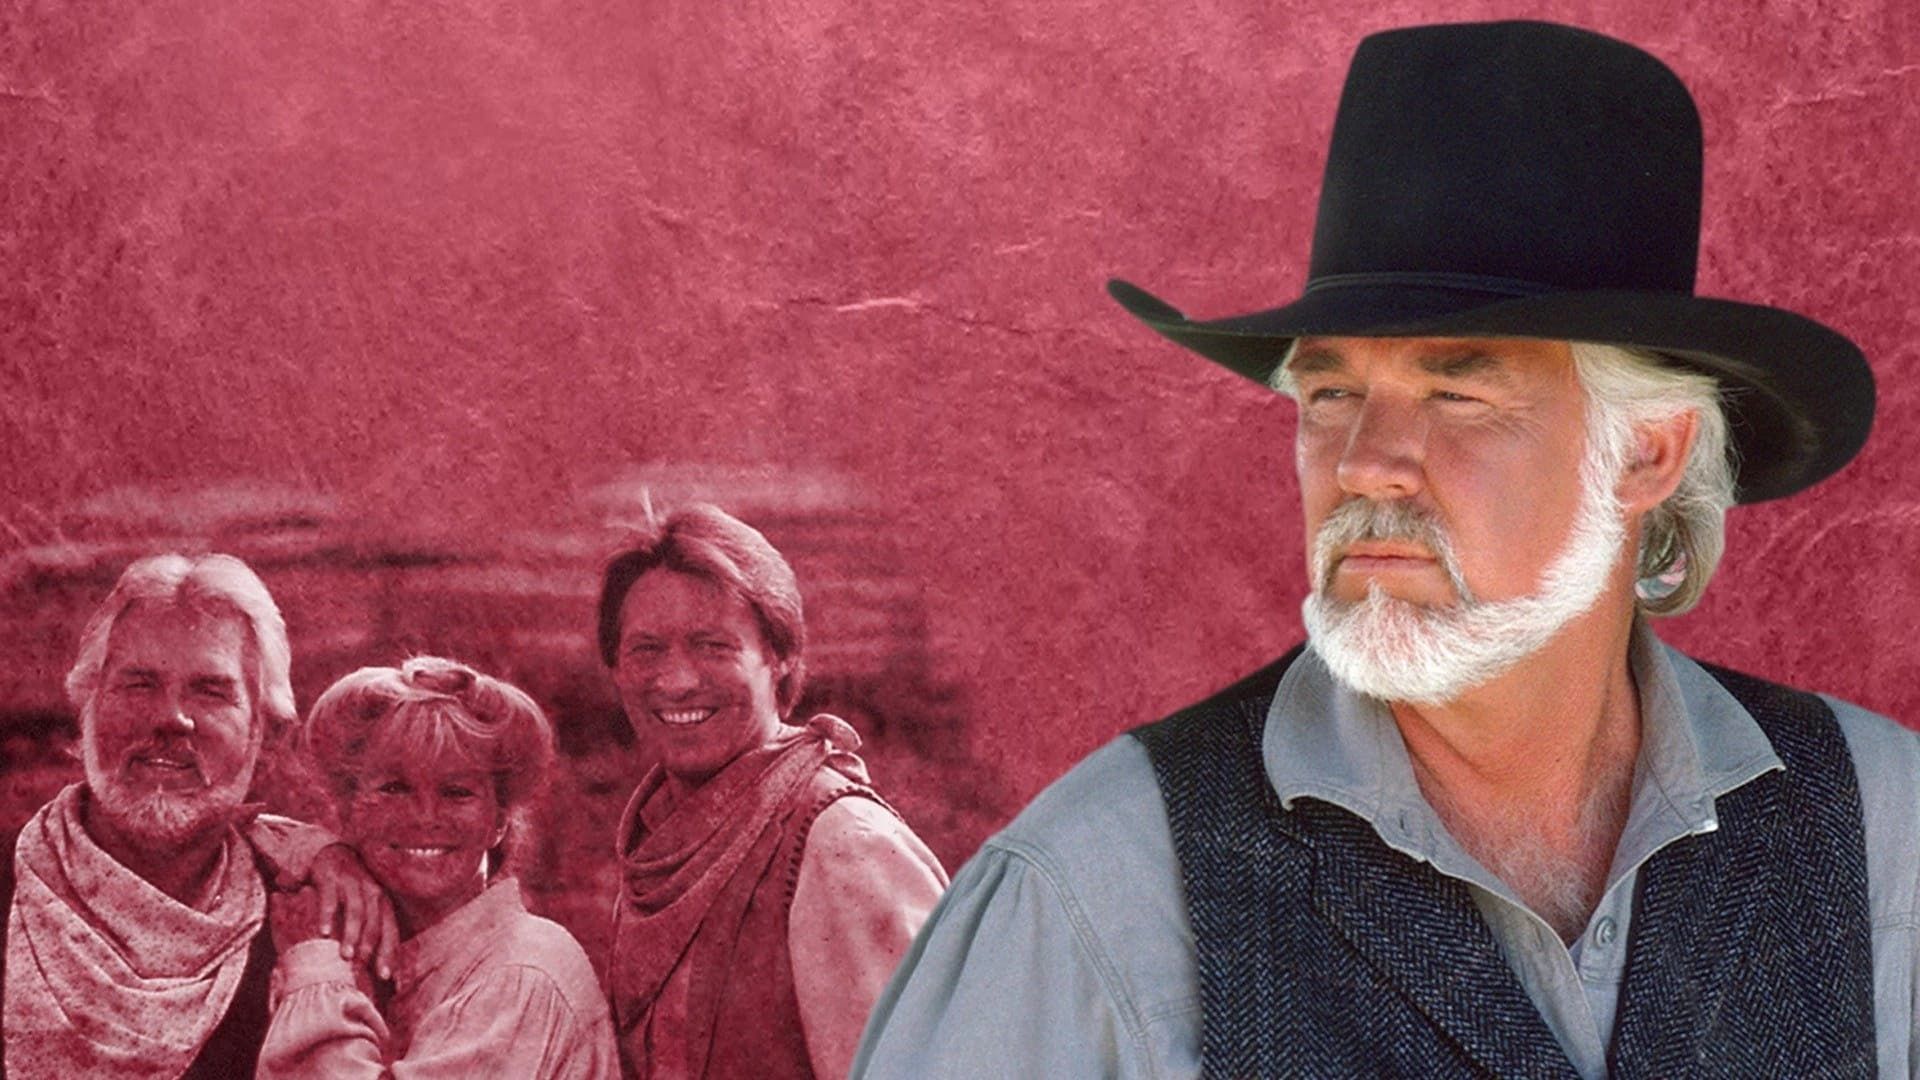 Kenny Rogers as The Gambler: The Adventure Continues background